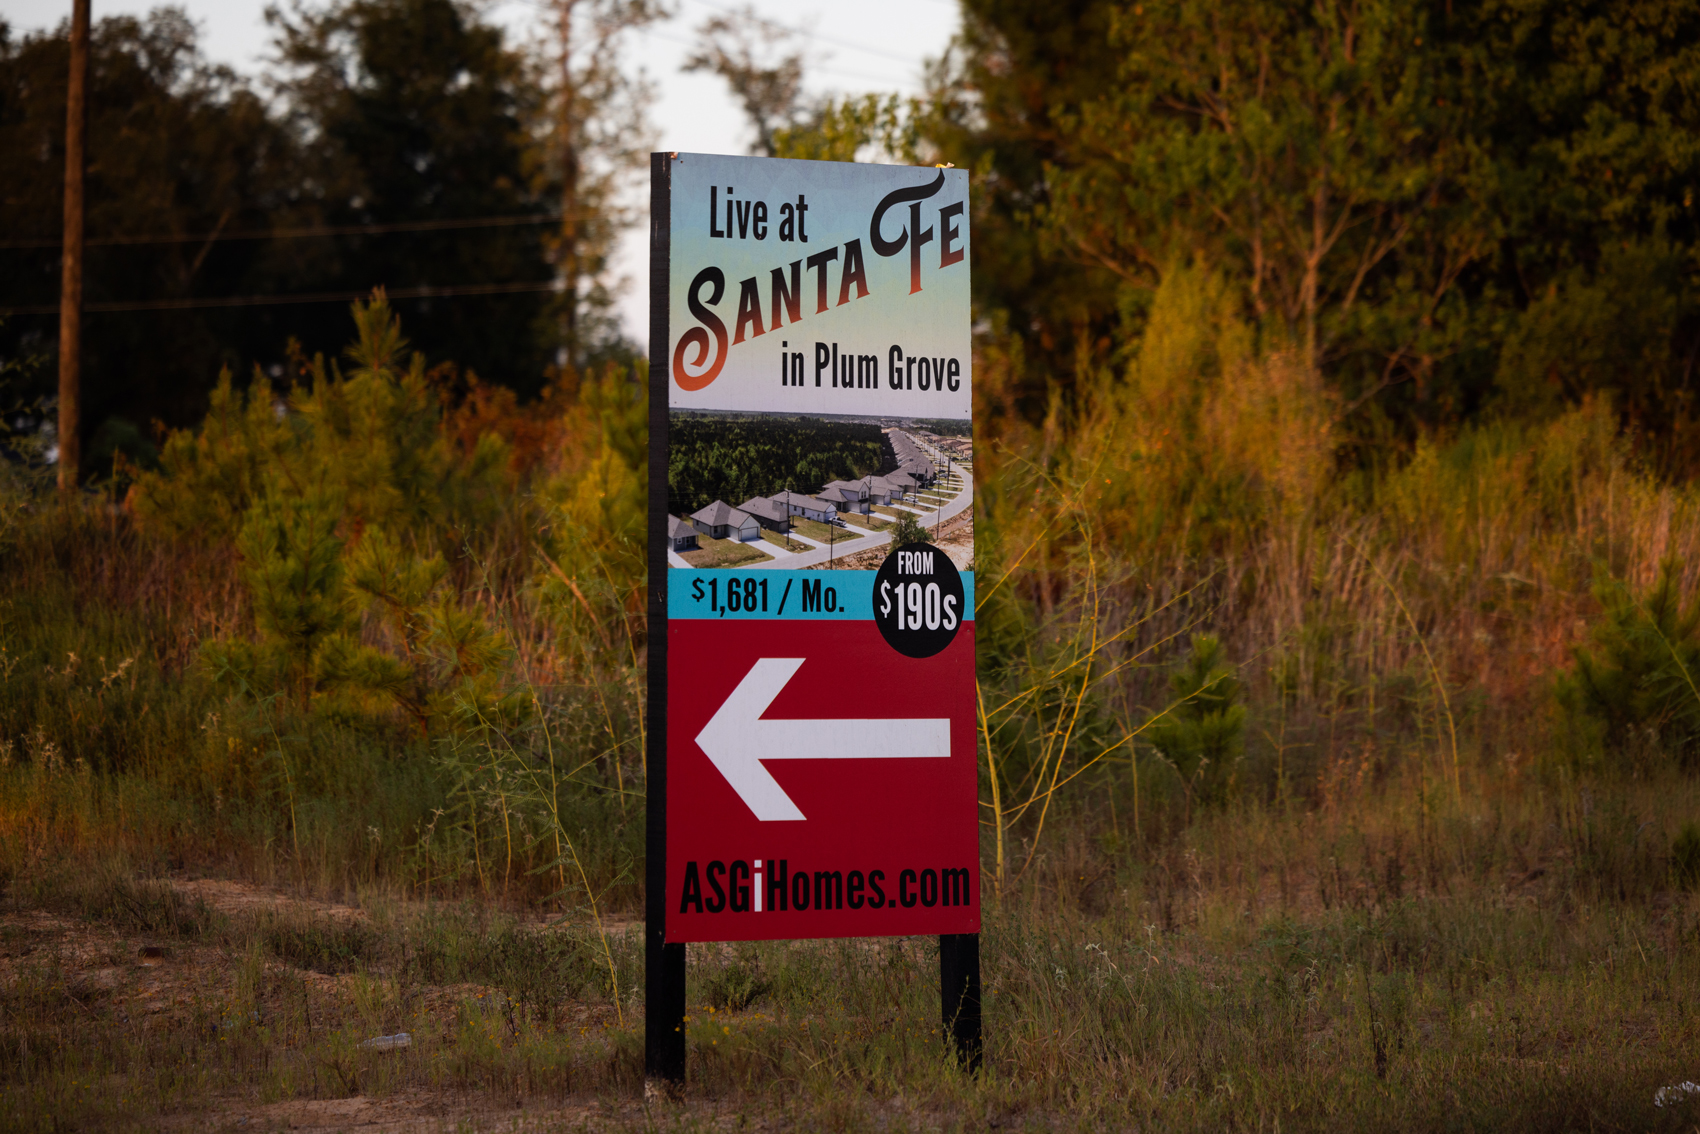 A sign promoting property in the Santa Fe subdivision of Colony Ridge, a sprawling development about 40 miles northeast of Houston.